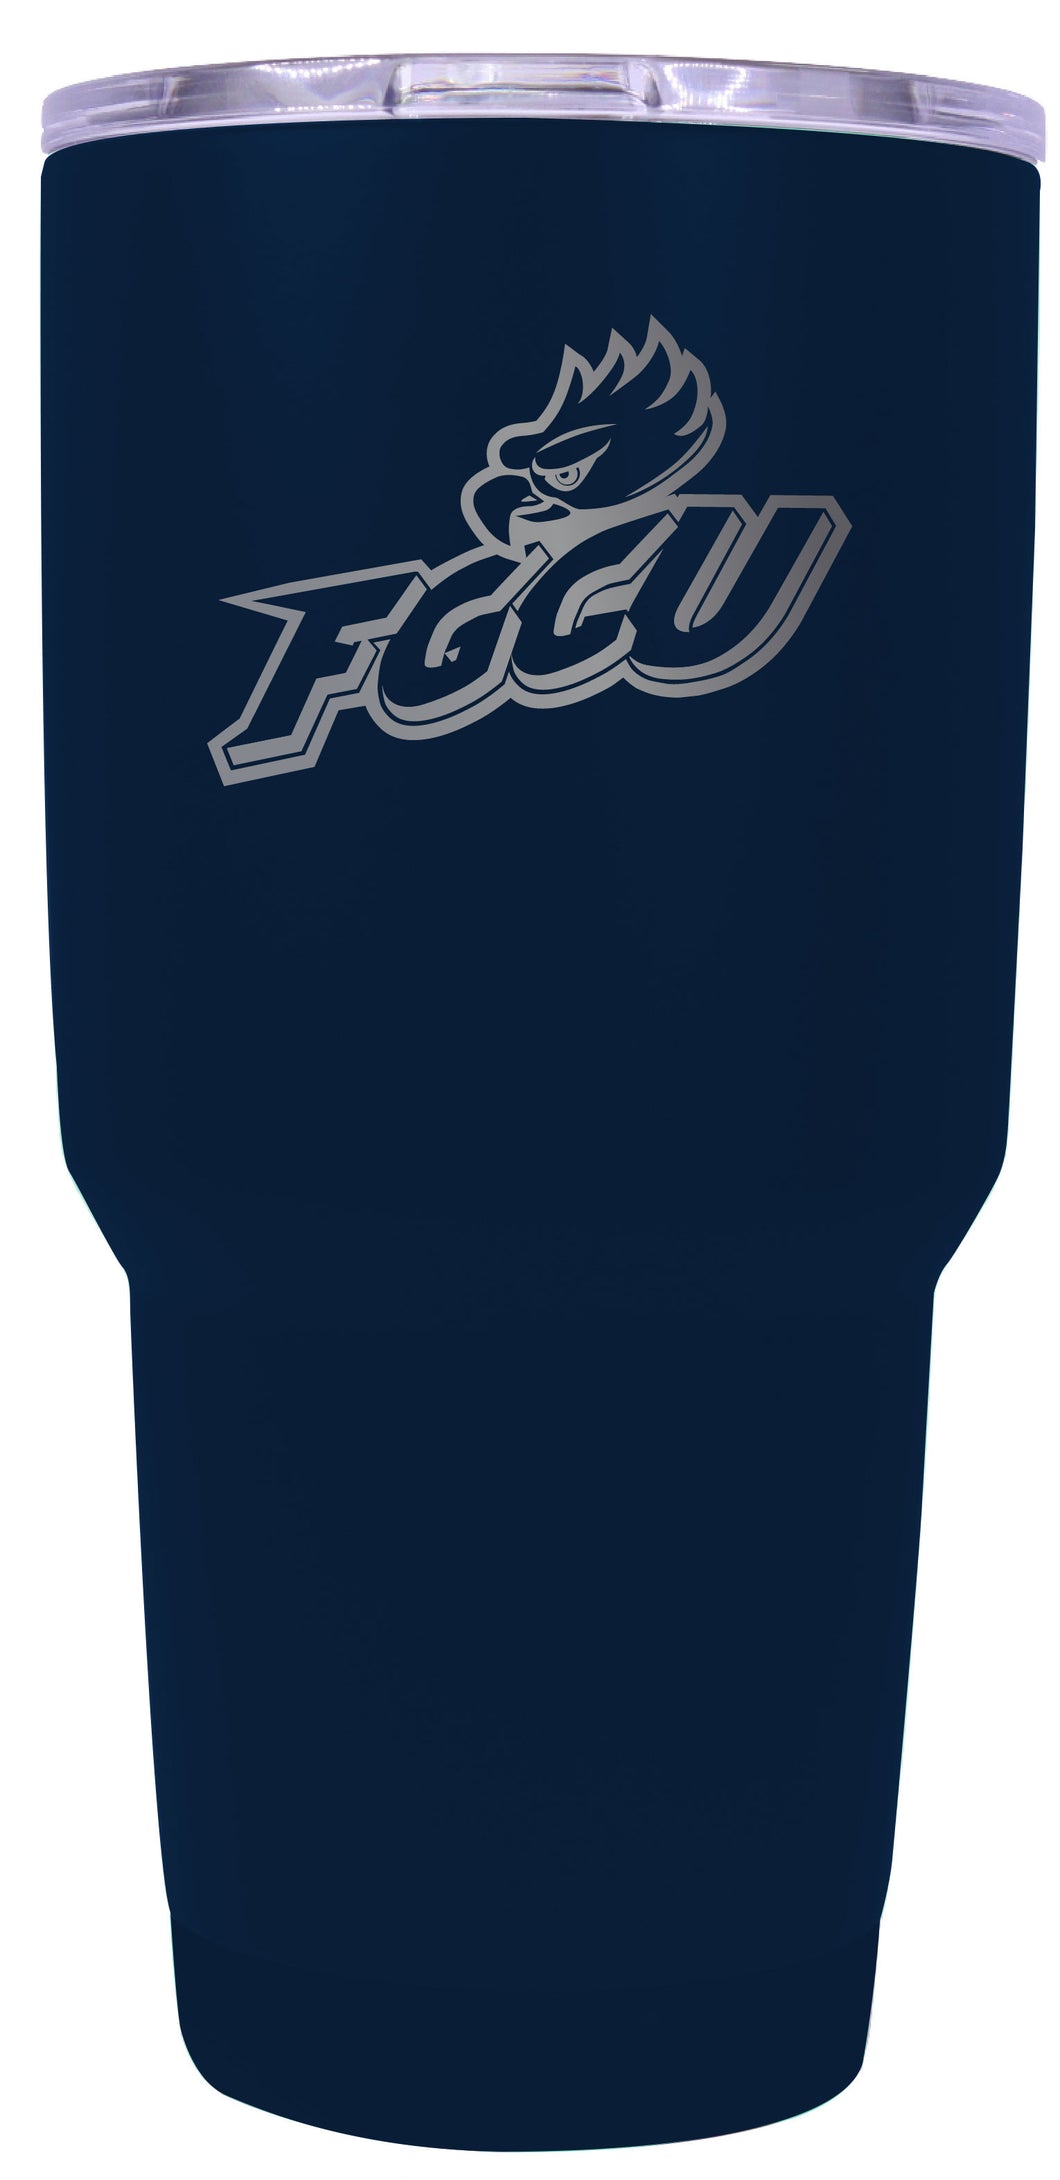 Florida Gulf Coast Eagles Premium Laser Engraved Tumbler - 24oz Stainless Steel Insulated Mug Choose Your Color.